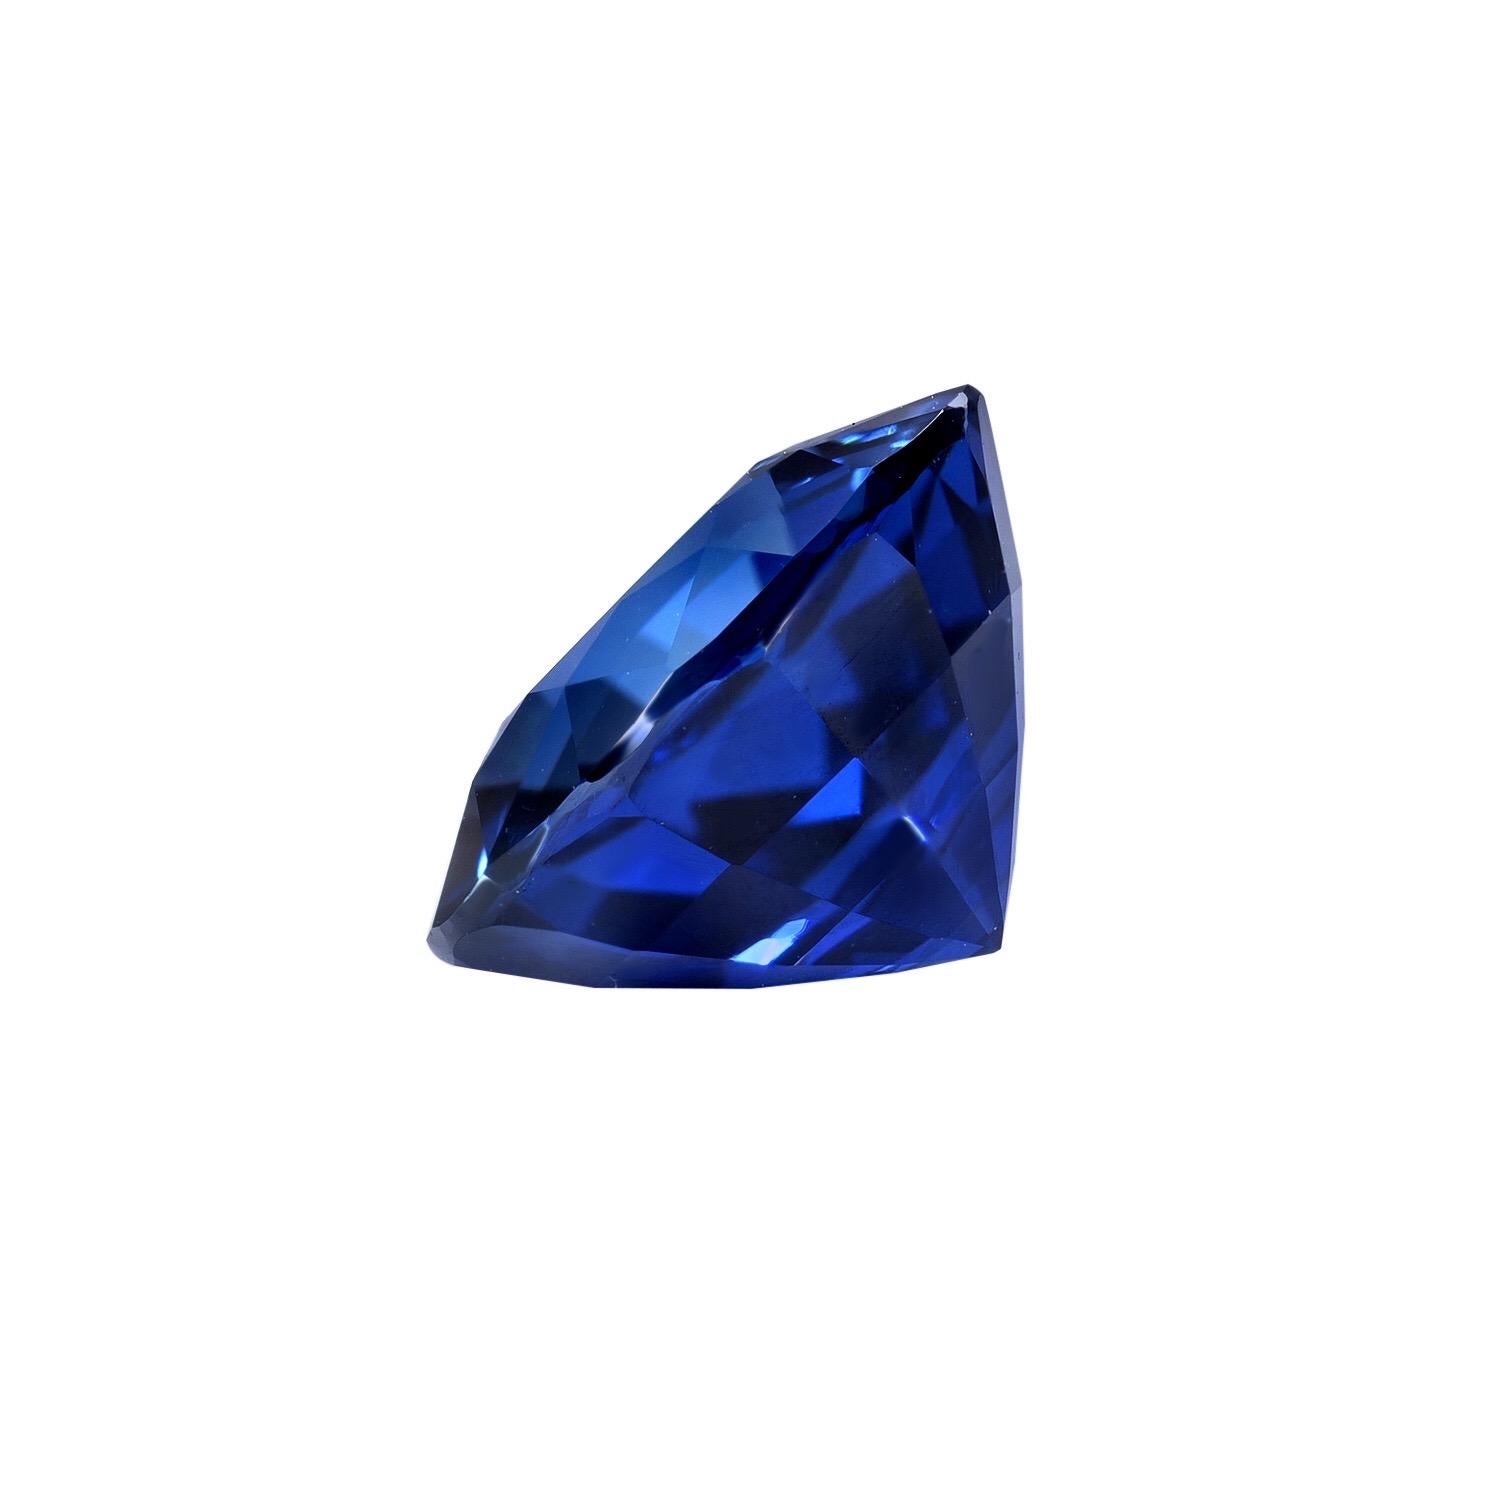 Royal Blue 3.01 carat unheated Burma Sapphire round gem, offered loose to an avid gemstone collector.
The G.I.A and GRS certificates are attached to the image selection for your convenience.
Returns are accepted and paid by us within 7 days of